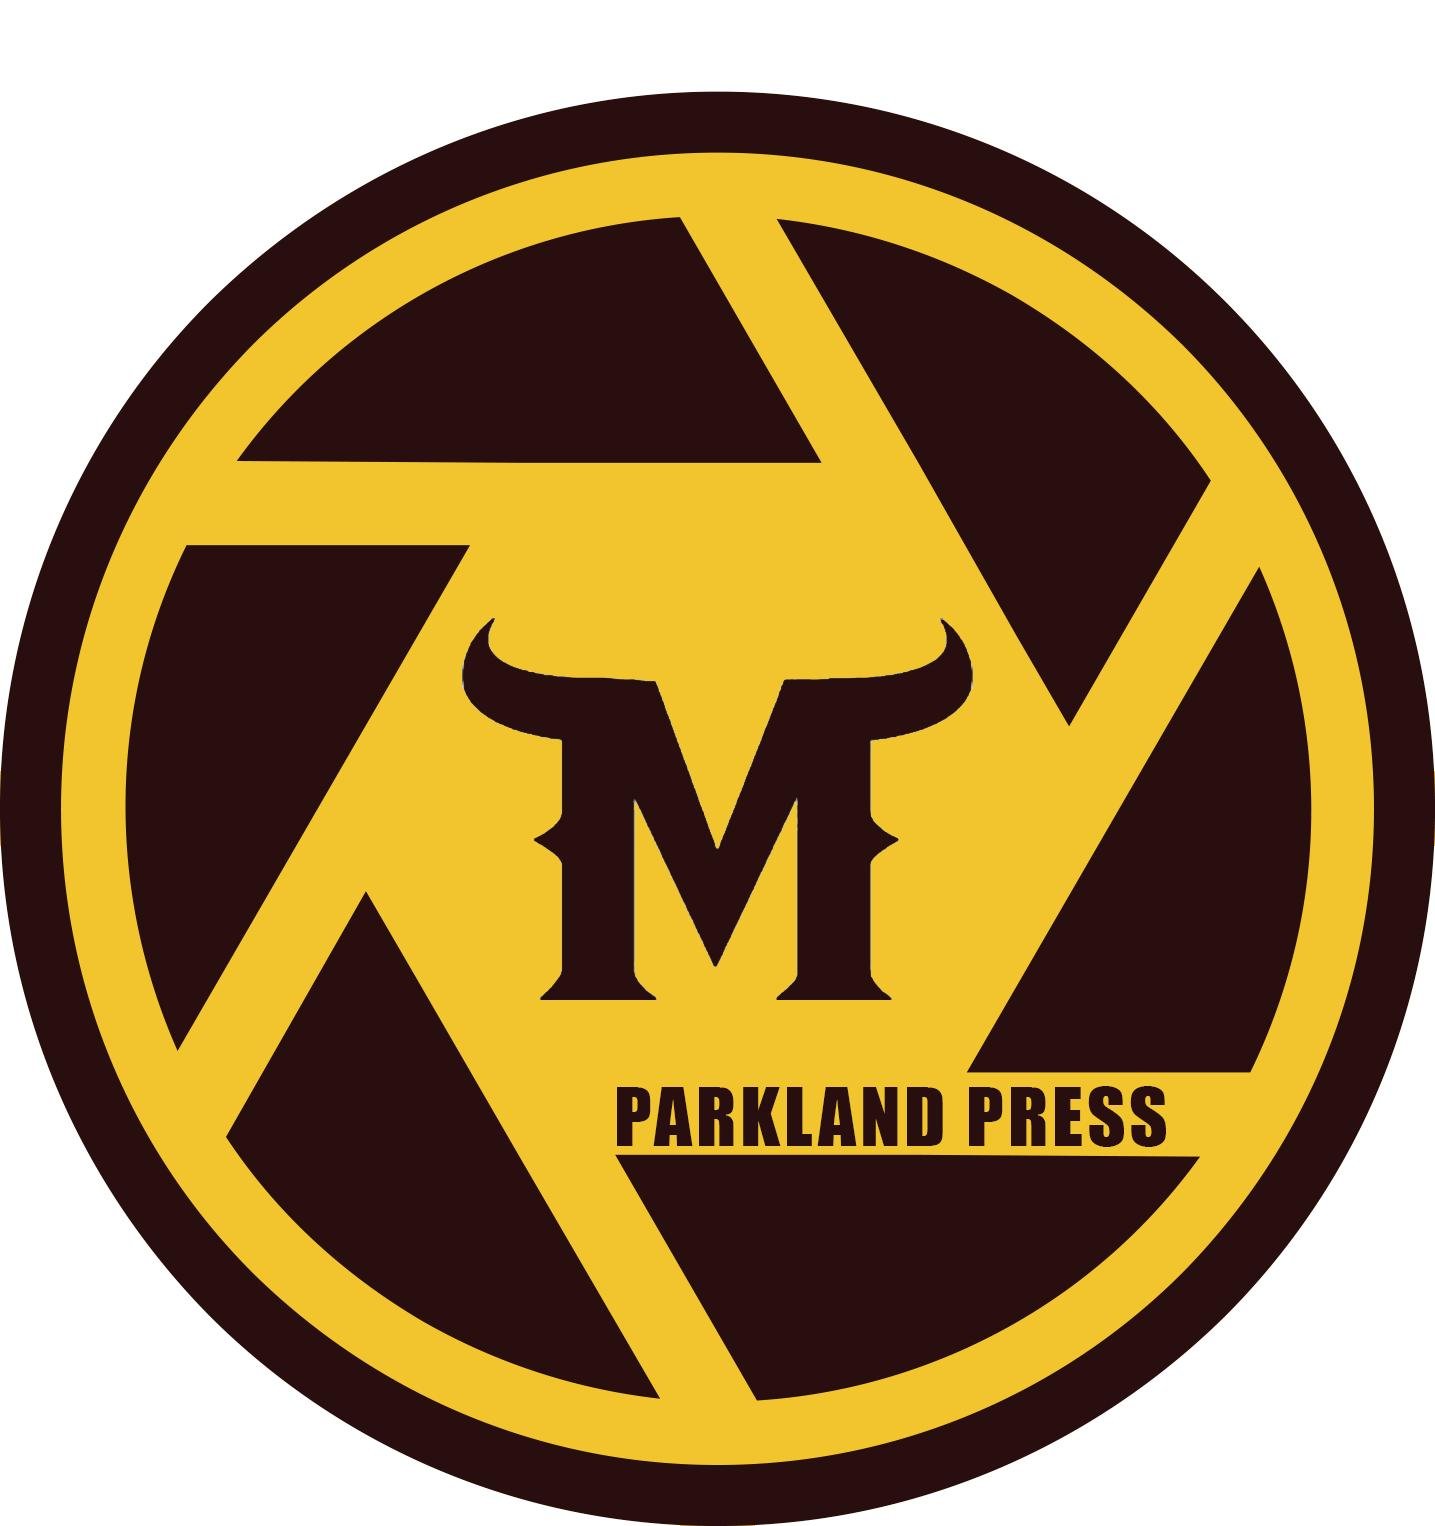 We represent Parkland High School's school newspaper, Parkland Press, and yearbook, Arena. We Photograph, design, edit and report on PHS news